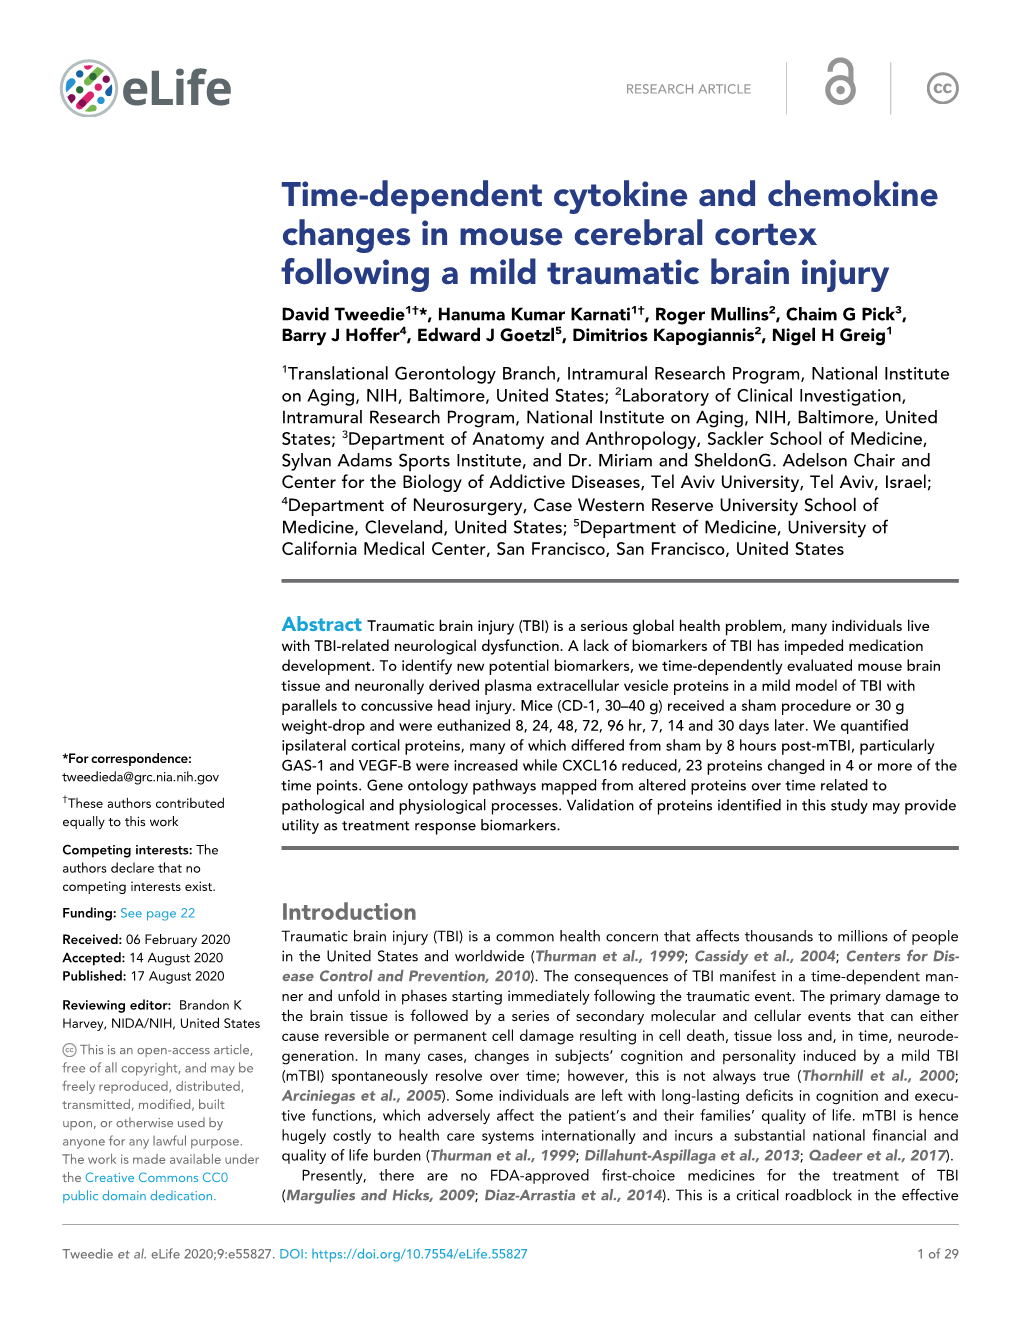 Time-Dependent Cytokine and Chemokine Changes in Mouse